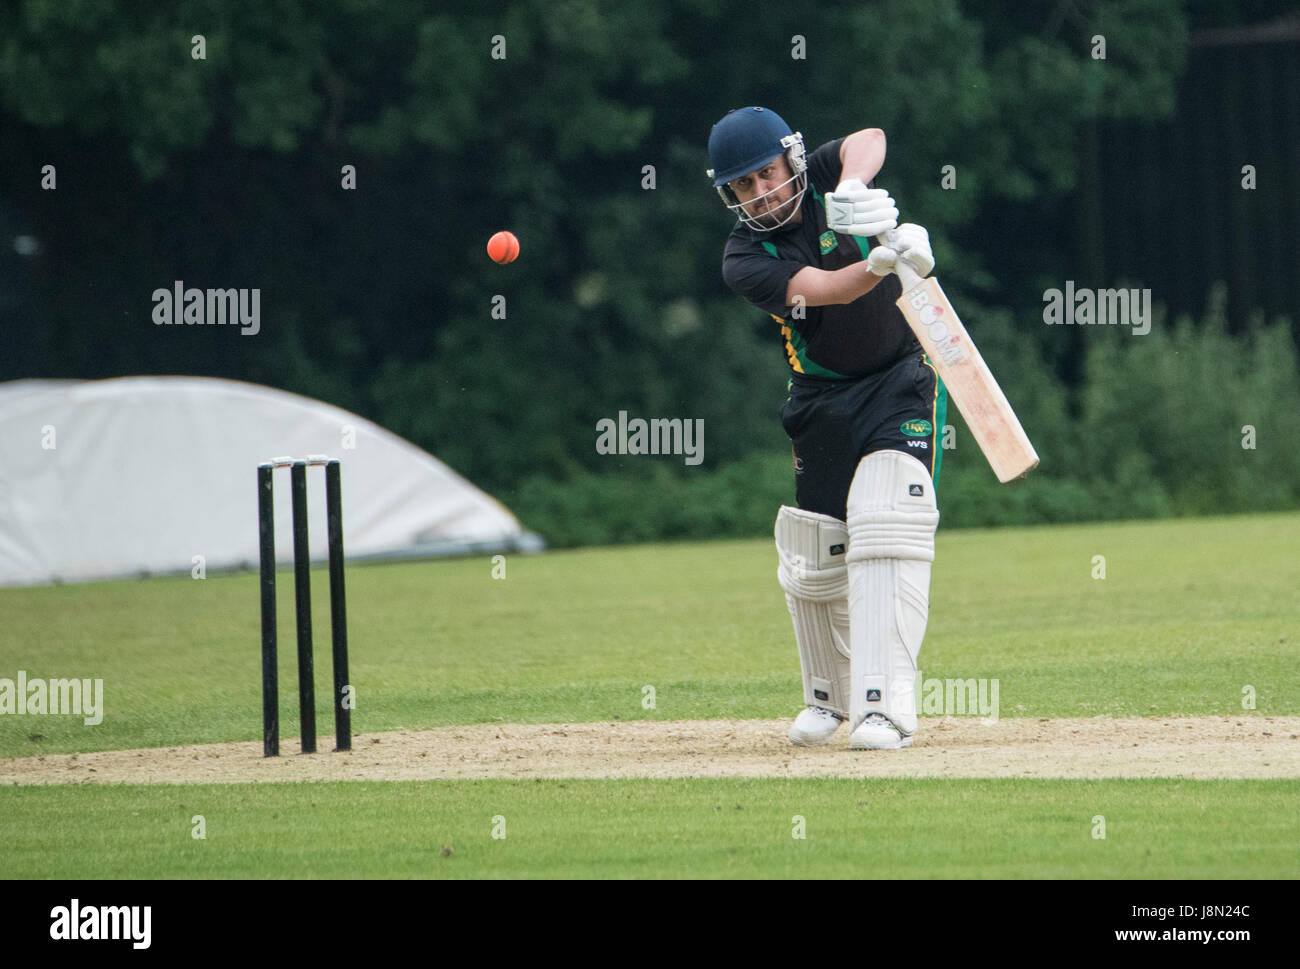 Brentwood, Essex, 29h May 2017. T20 Cricket match Brentwood Buccaneers vs Harold Wood at the Old County Ground, Brentwood, Brentwood won by 10 wickets Credit: Ian Davidson/Alamy Live News Stock Photo